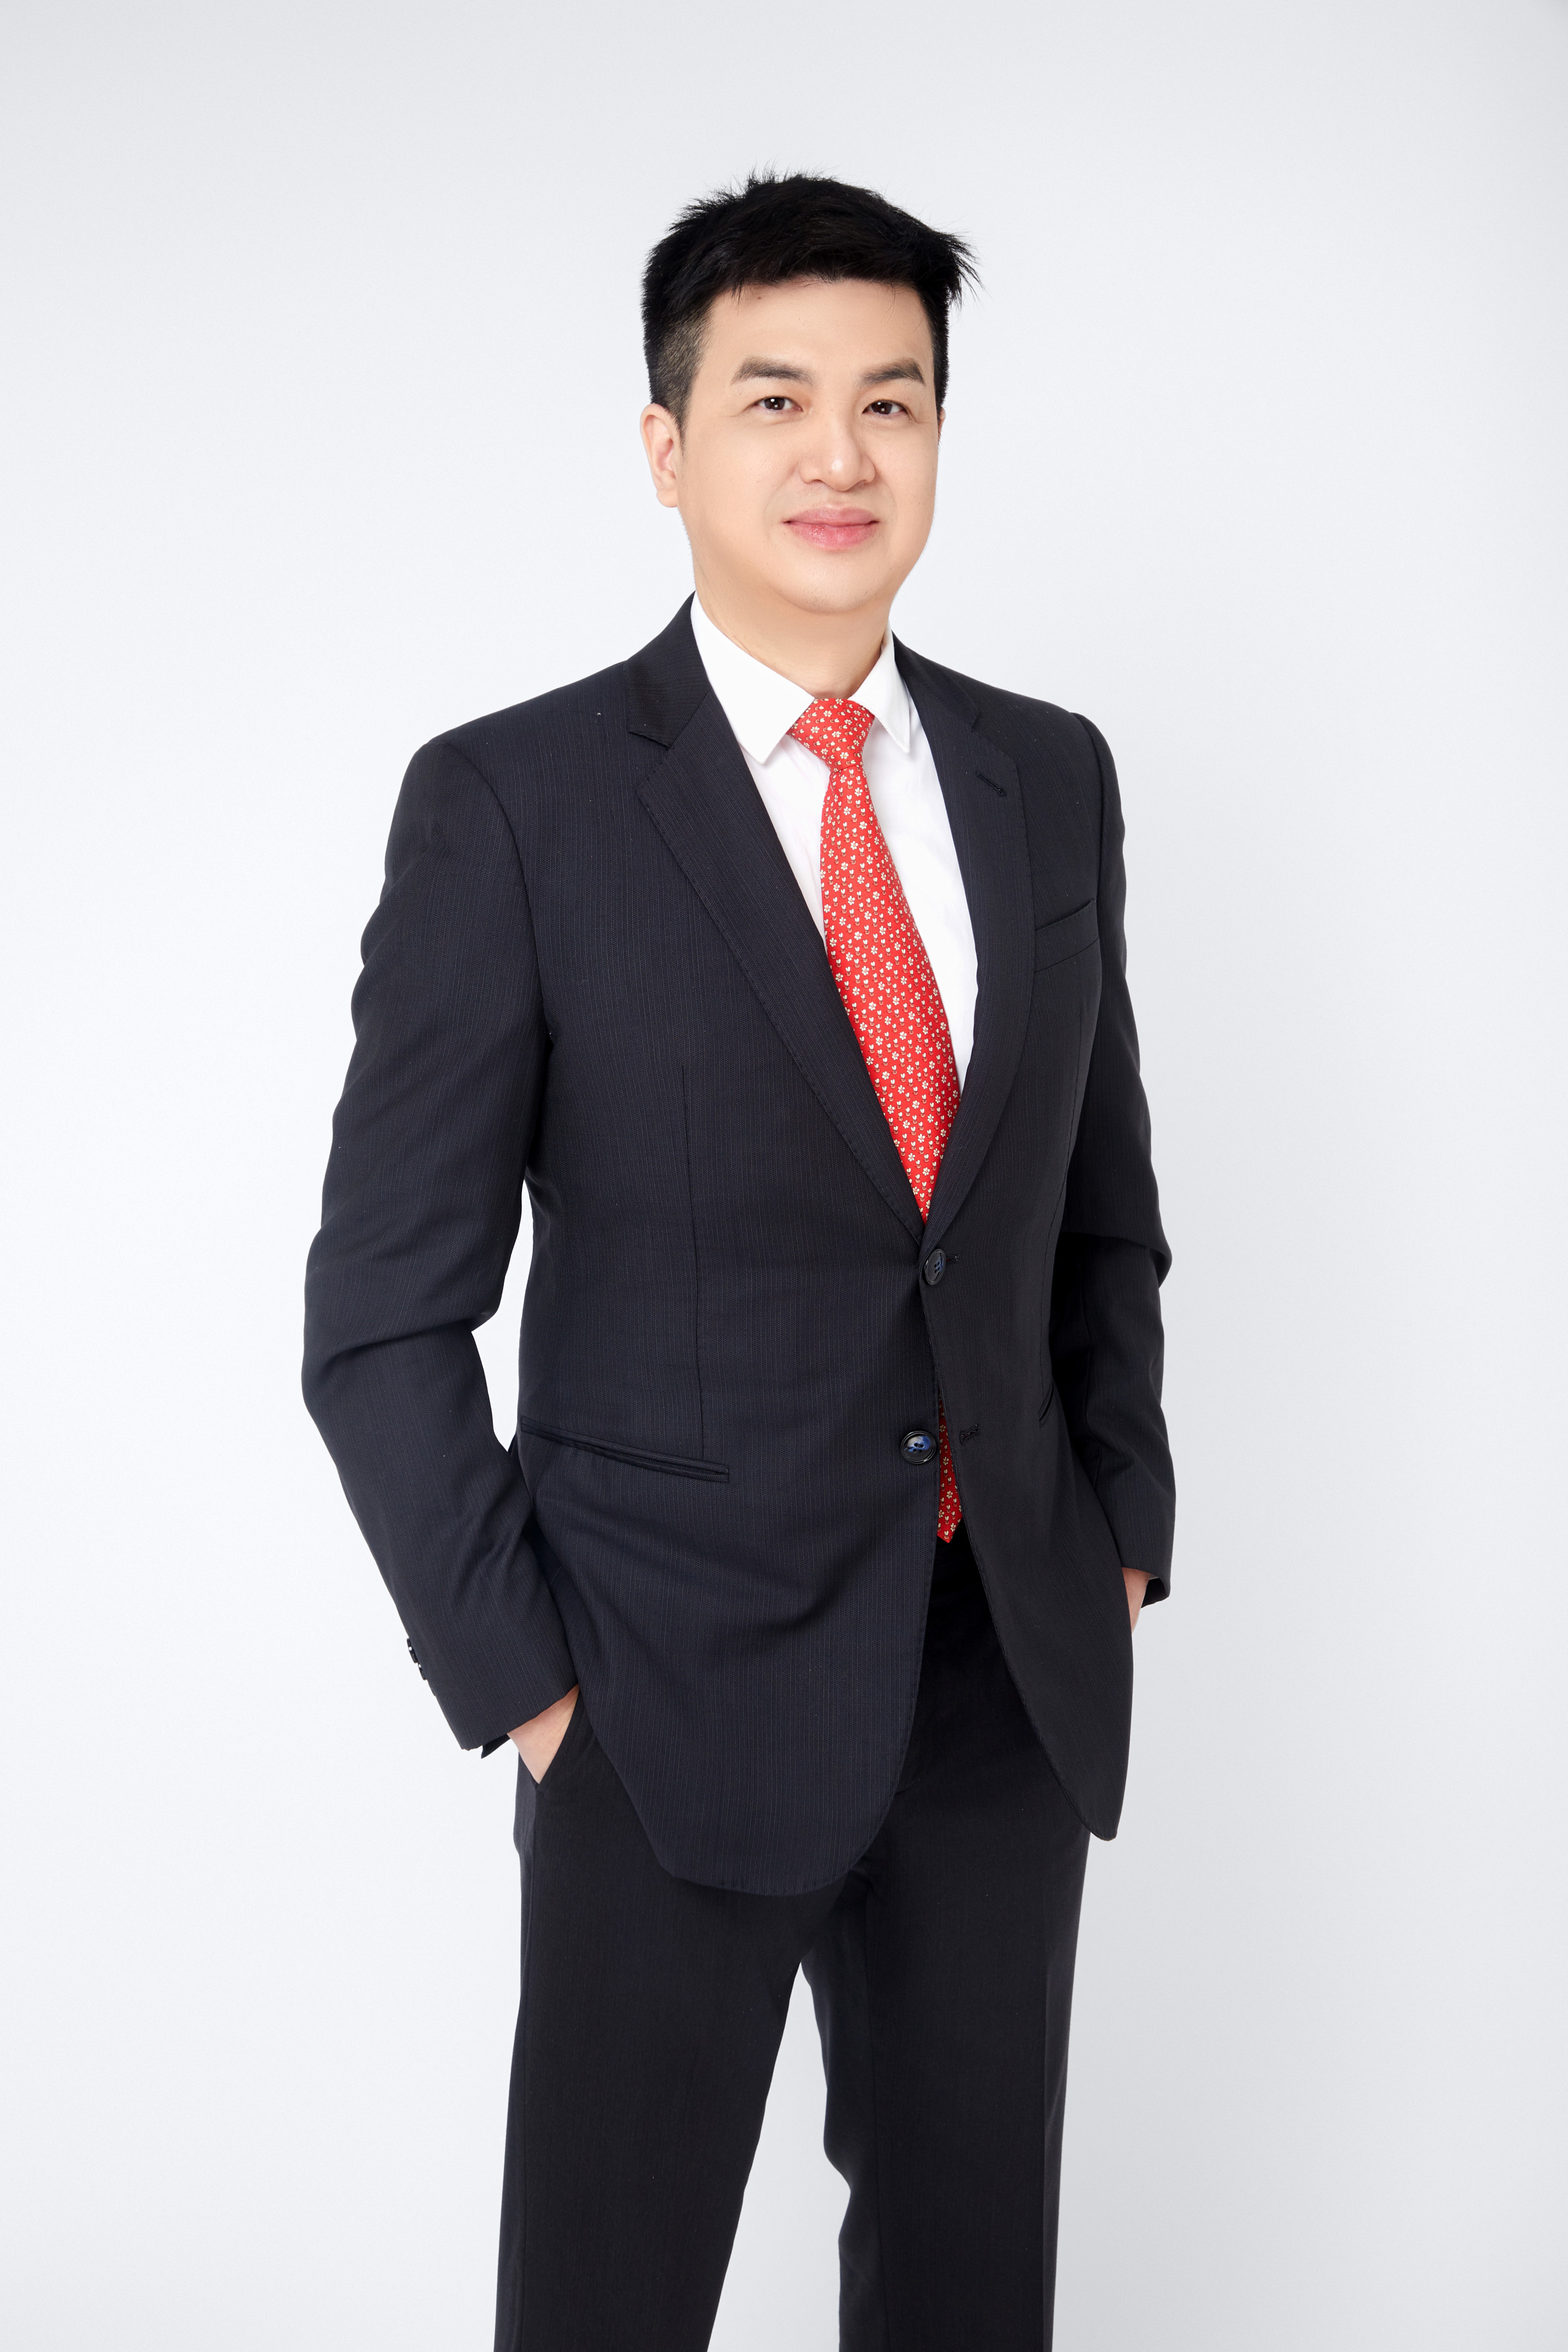 Jeffrey Wong, founder and CEO